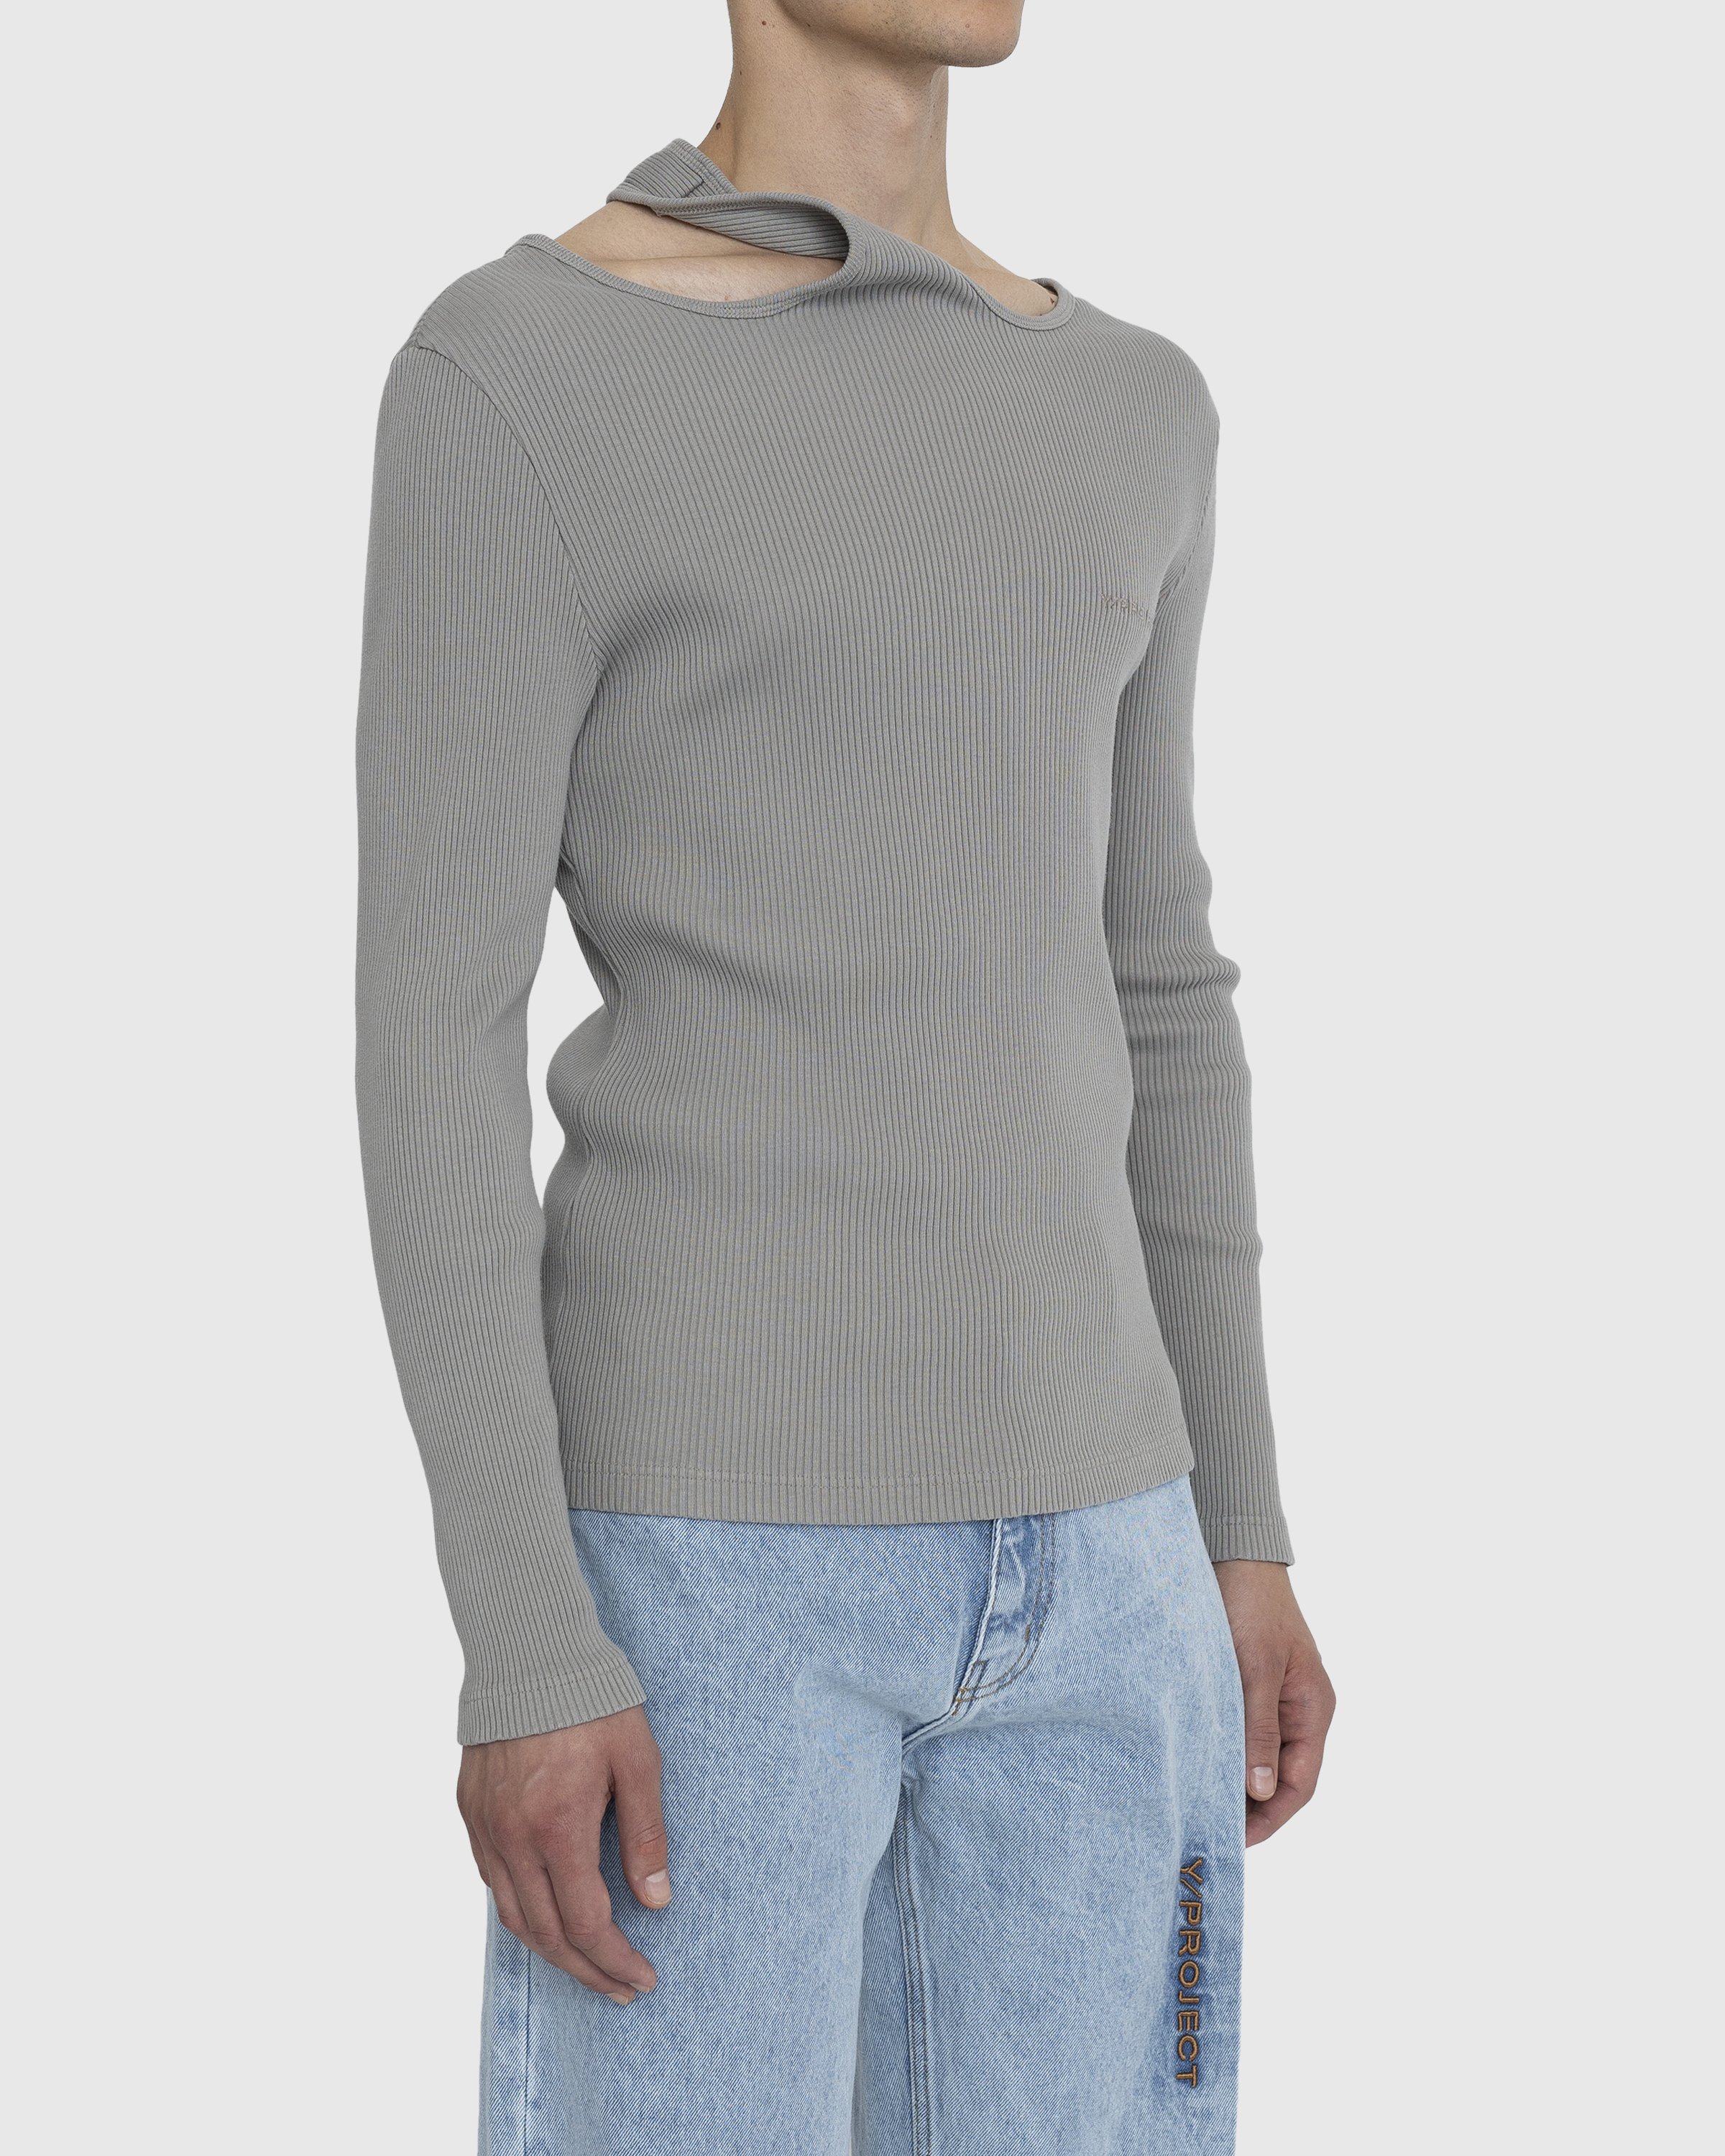 Y/Project - Classic Double Collar T-Shirt Taupe - Clothing - Grey - Image 3